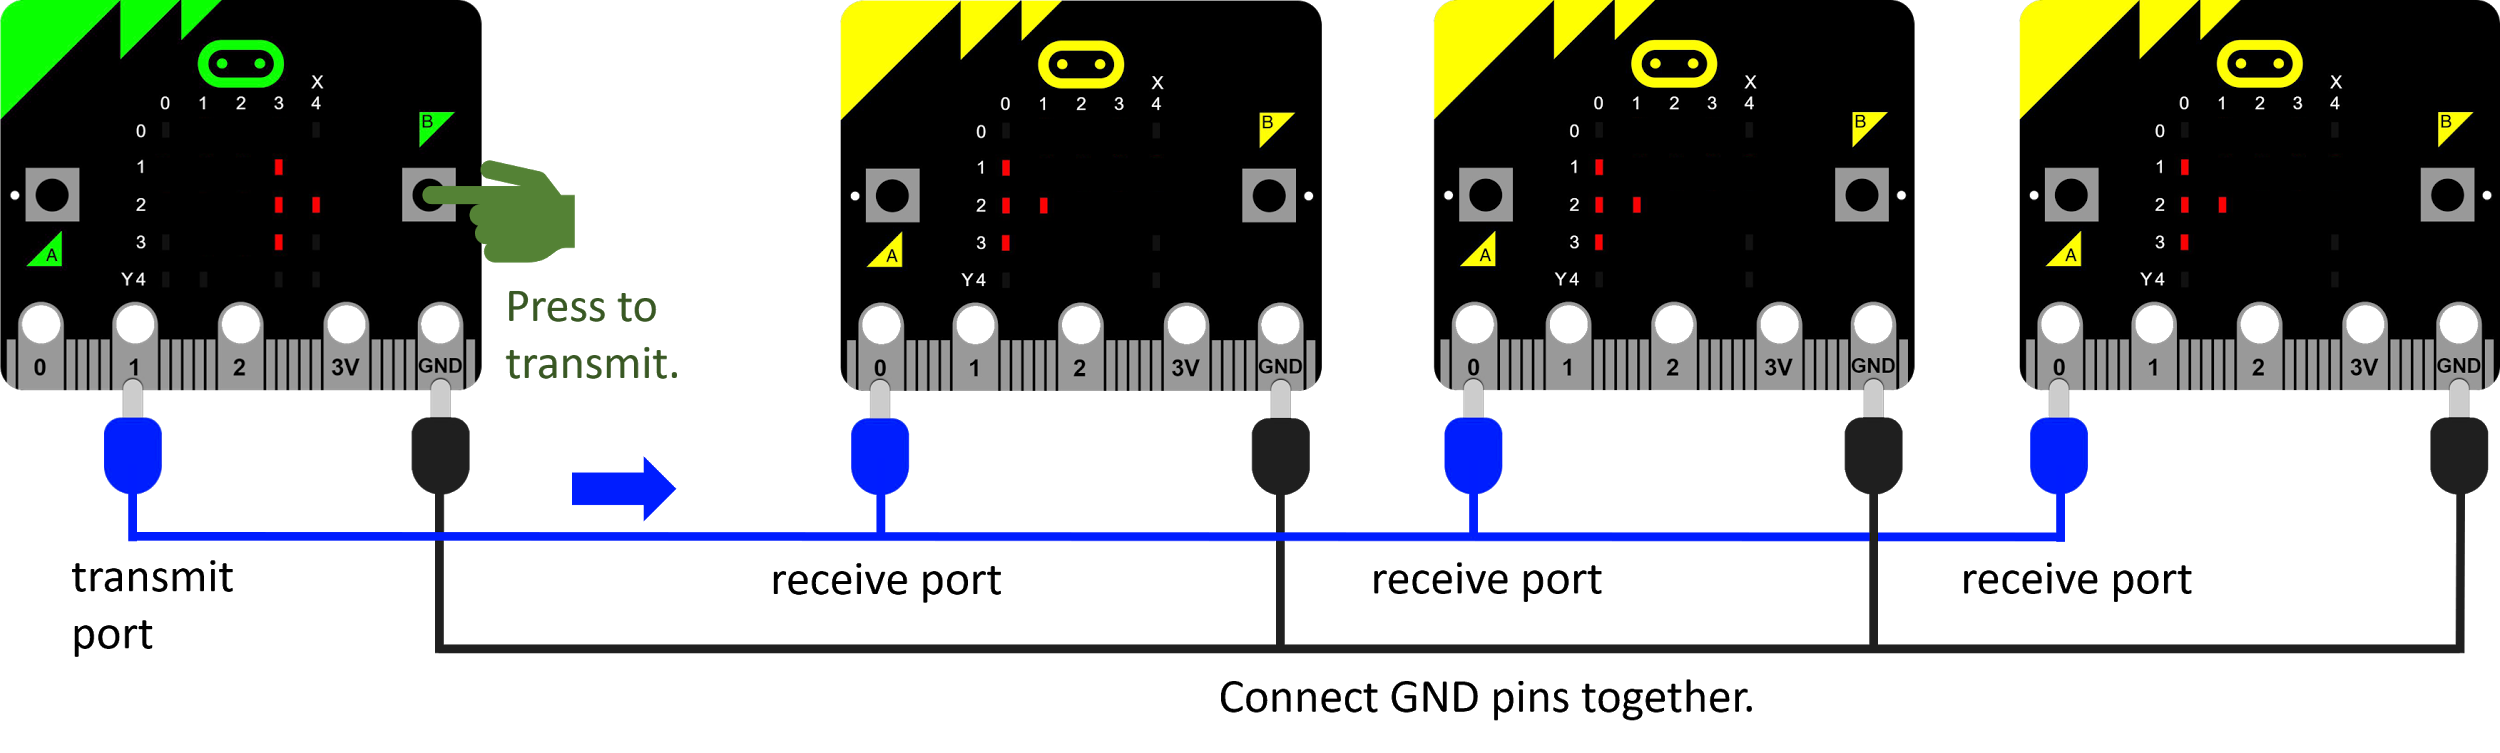 Diagram of four micro:bits connected together. Device 1 is the transmitter. It is green. Devices 2, 3 and 4 are receivers. They are yellow. Each device has a grid: an X axis labelled 0, 1, 2, 3, 4; and a Y axis labelled 0, 1, 2, 3, 4. Each device has two buttons labelled A and B. Each device has five pins labelled 0, 1, 2, 3V and GND. On Device 1, Button B is being pressed. Device 1 has four lights lit up (X axis listed first, then Y axis): 3, 1; 3, 2; 4, 2; 3, 3. Devices 2, 3 and 4 have four lights lit up: 0, 1; 0, 2; 1, 2; 0, 3. Connecting cable 1 is connected to Device 1, Pin 1. This is labelled transmit port. It is connected to Devices 2, 3 and 4 on Pin 0. These are labelled receive port. This cable is blue. Connecting cable 2 connects the GND pins on the four devices together. This cable is black.